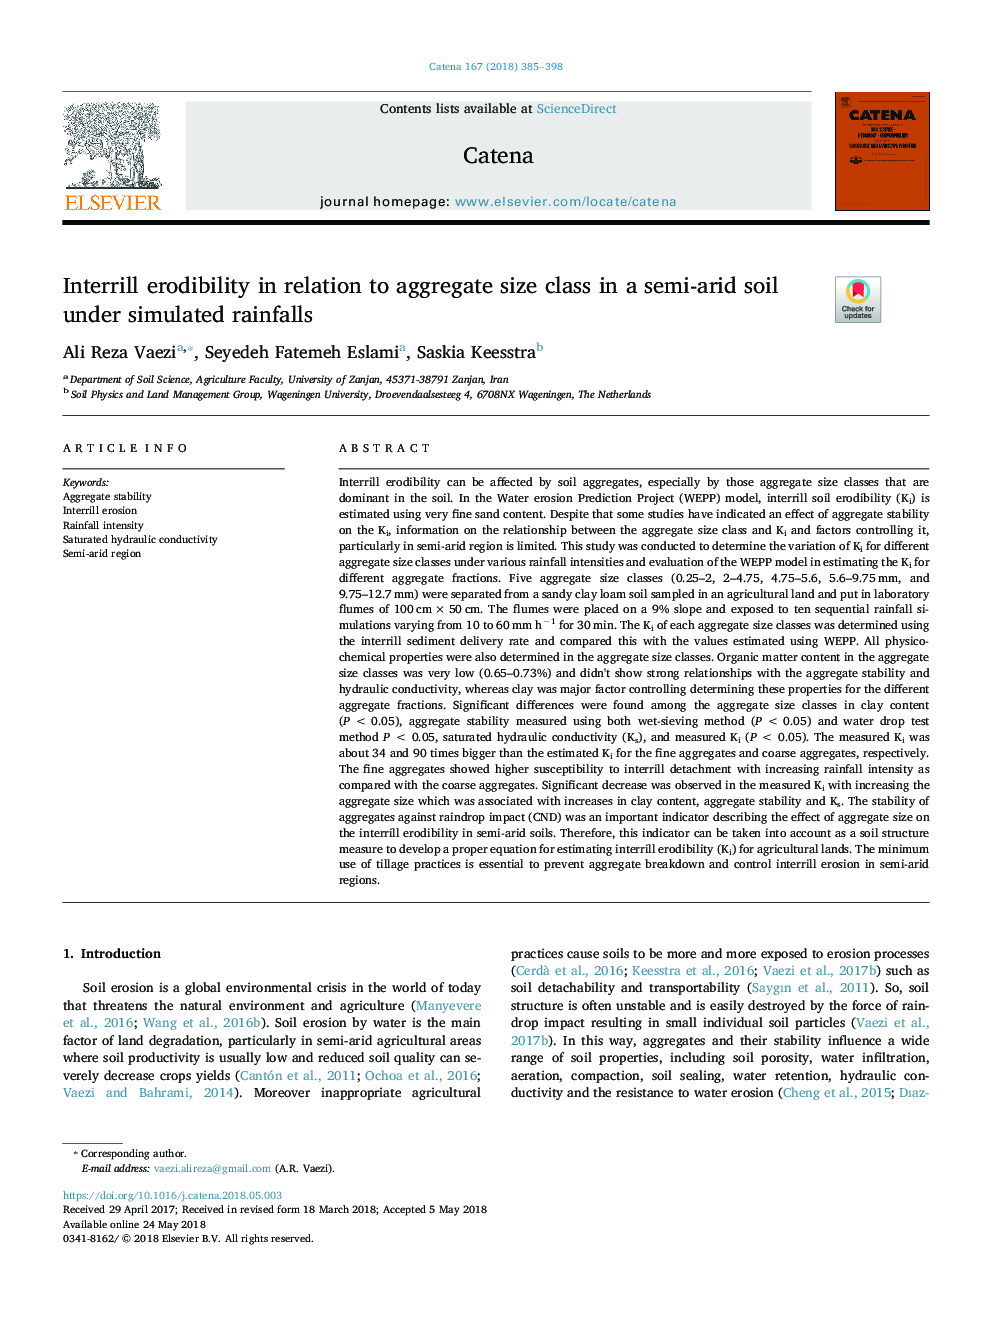 Interrill erodibility in relation to aggregate size class in a semi-arid soil under simulated rainfalls